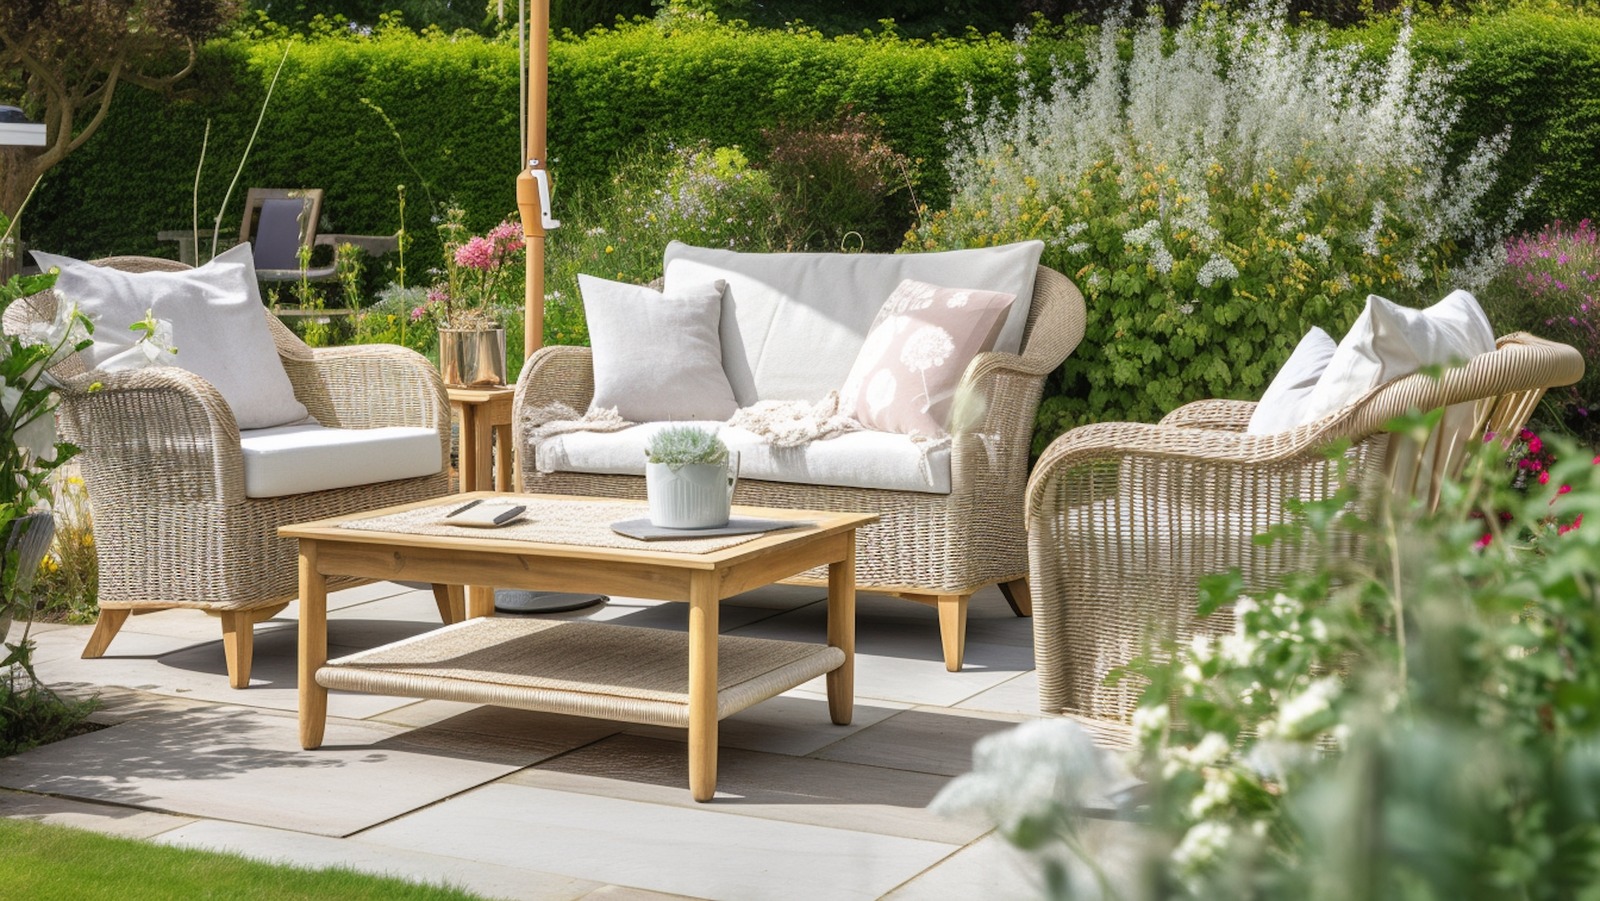 https://www.housedigest.com/img/gallery/everything-you-should-know-before-buying-martha-stewart-patio-furniture/l-intro-1701289867.jpg